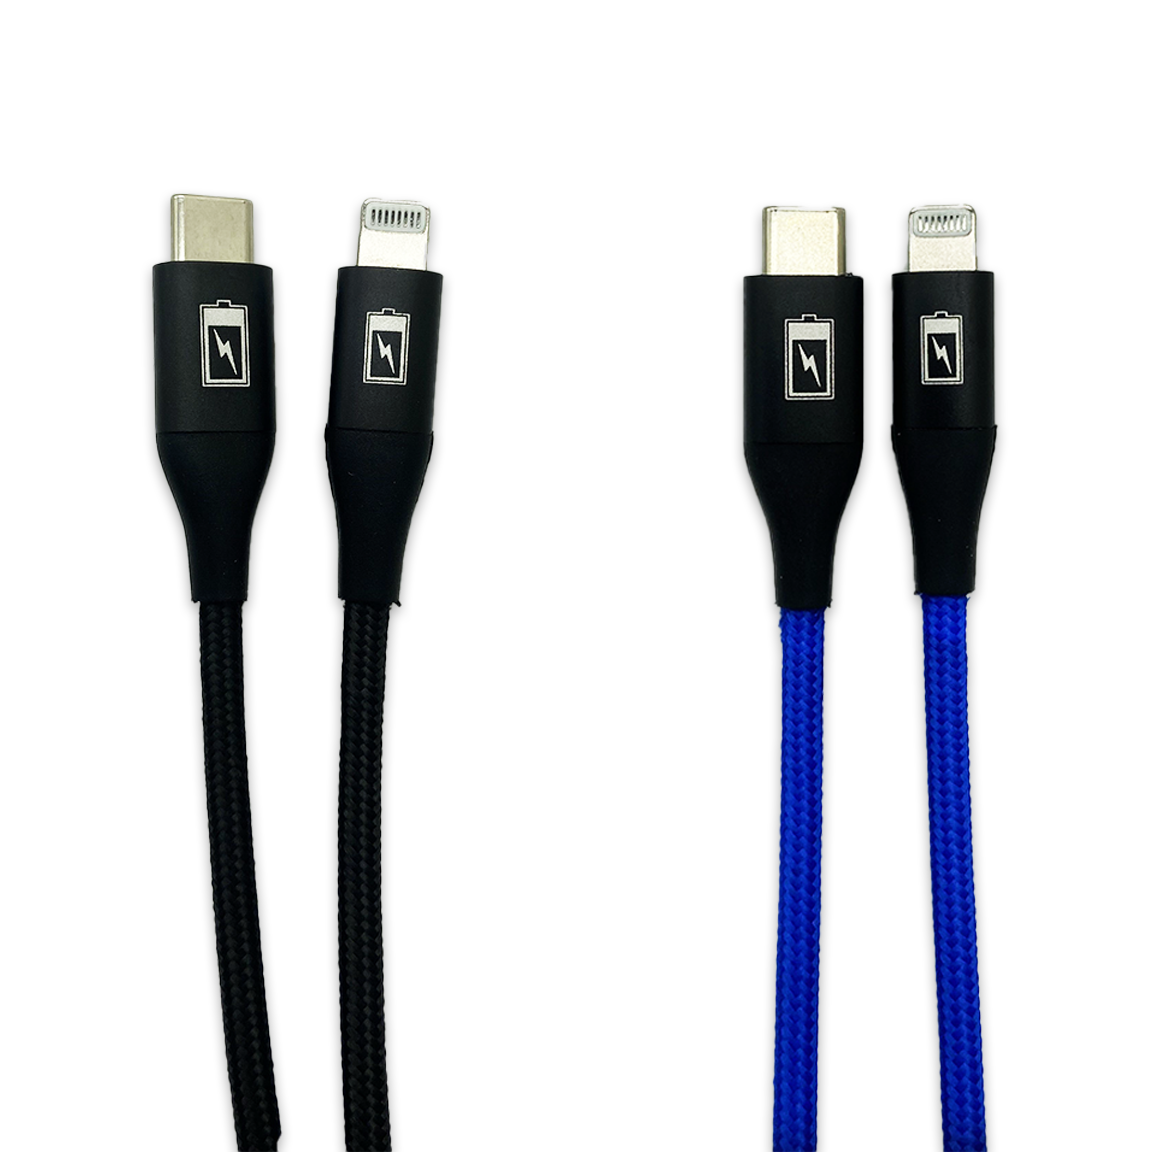 WHOLESALE 6FT NYLON BRAIDED USB-C-TO-LIGHTNING CABLE 3 PIECES PER PACK 24606